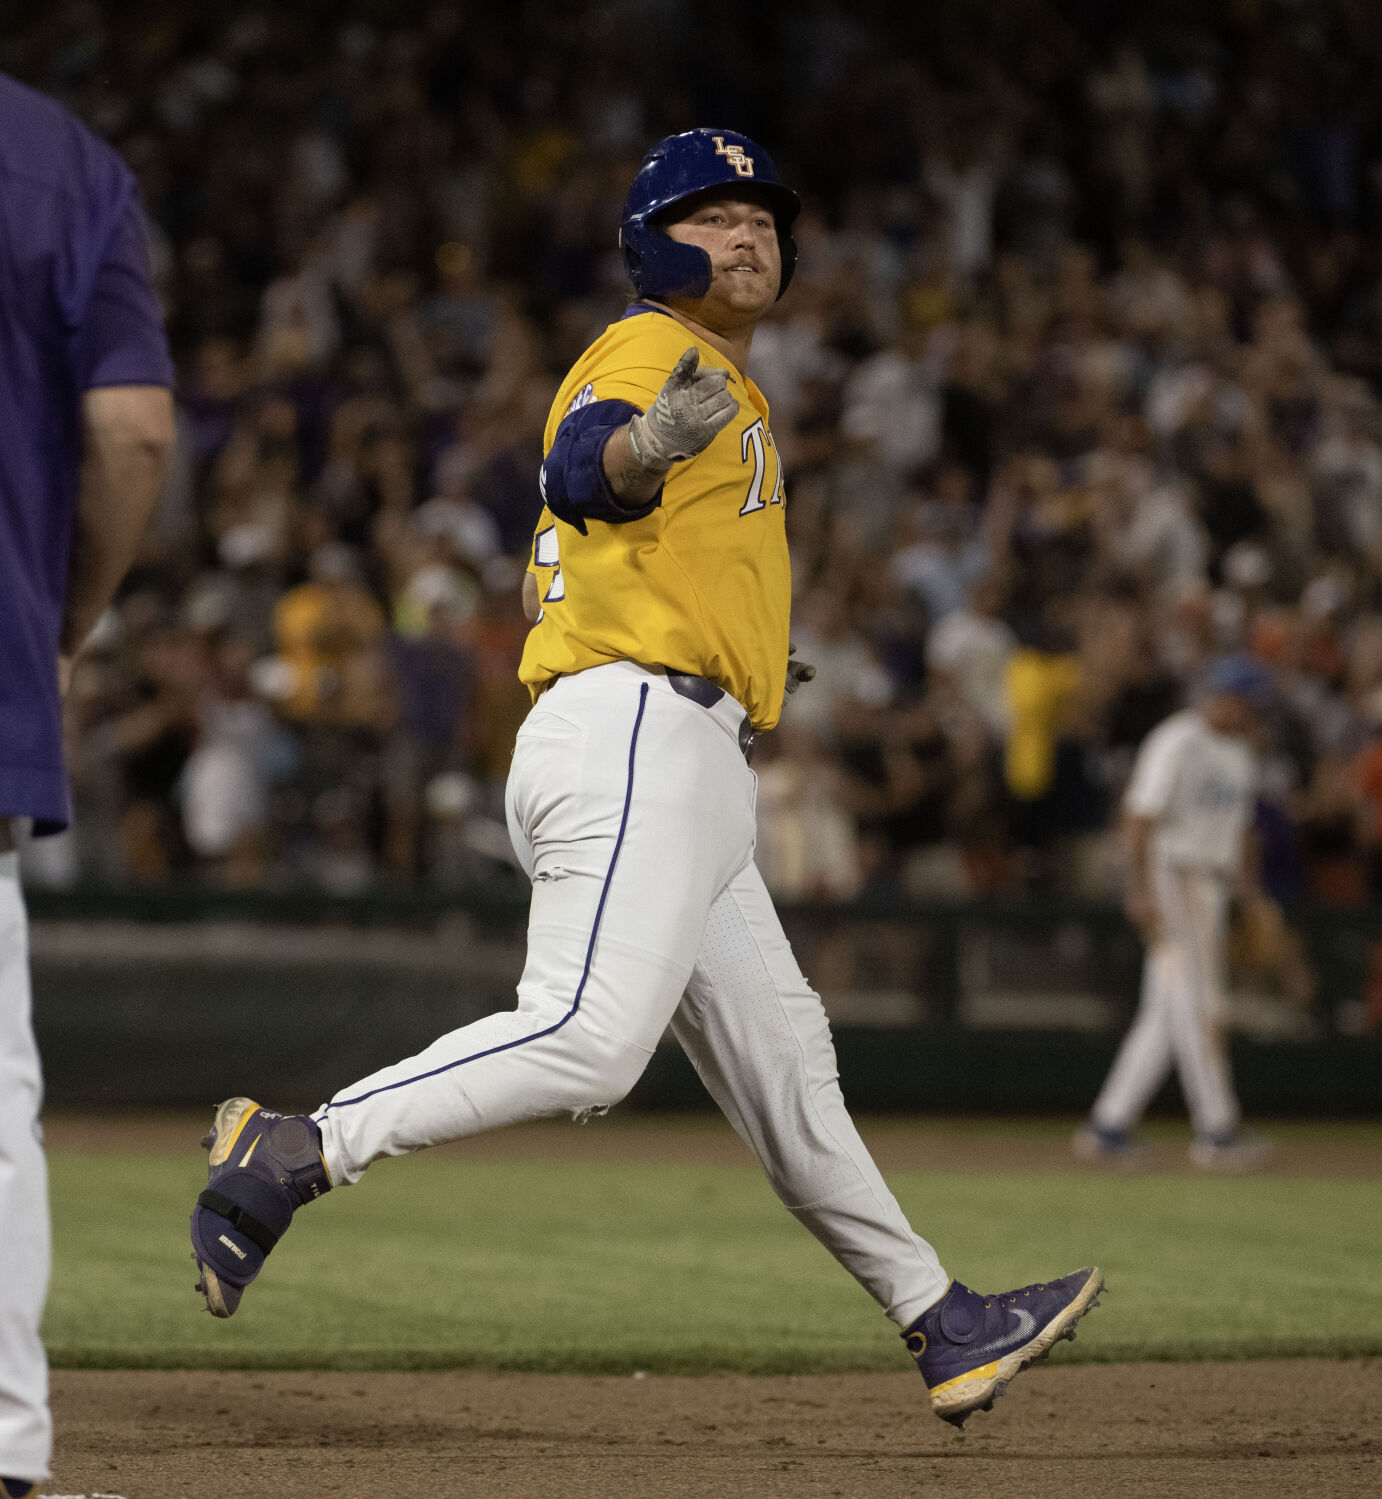 Photos: Belly Bomb in the 11th gives LSU 1-0 lead over Florida in